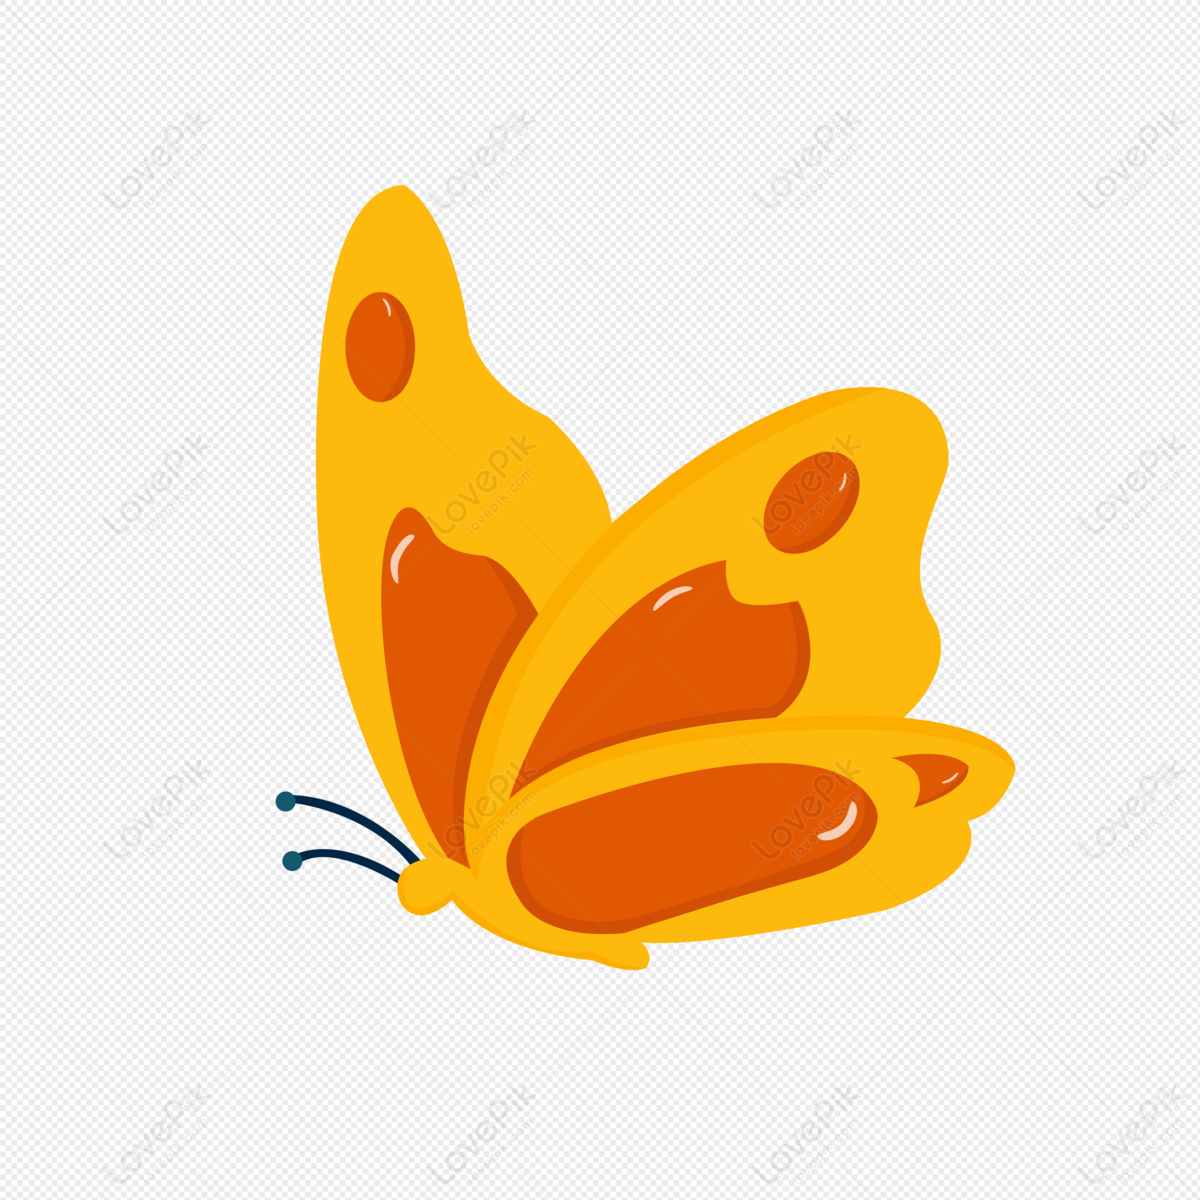 Flying Butterfly, Fly Butterfly, Flying, Butterfly PNG Transparent  Background And Clipart Image For Free Download - Lovepik